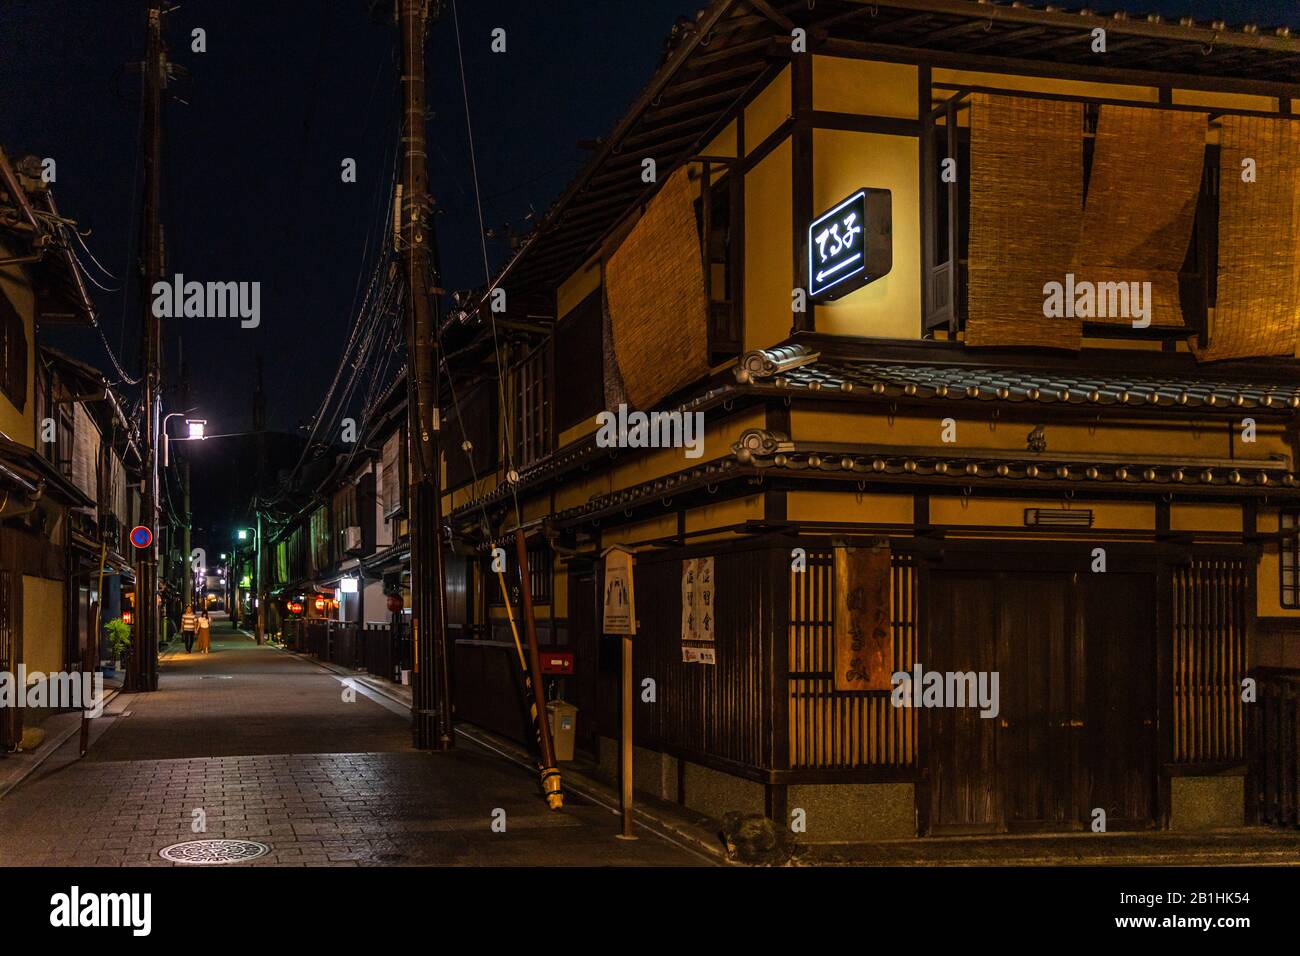 Night view of a traditional wooden machiya merchant house in Gion, Kyoto's most famous geisha district Stock Photo